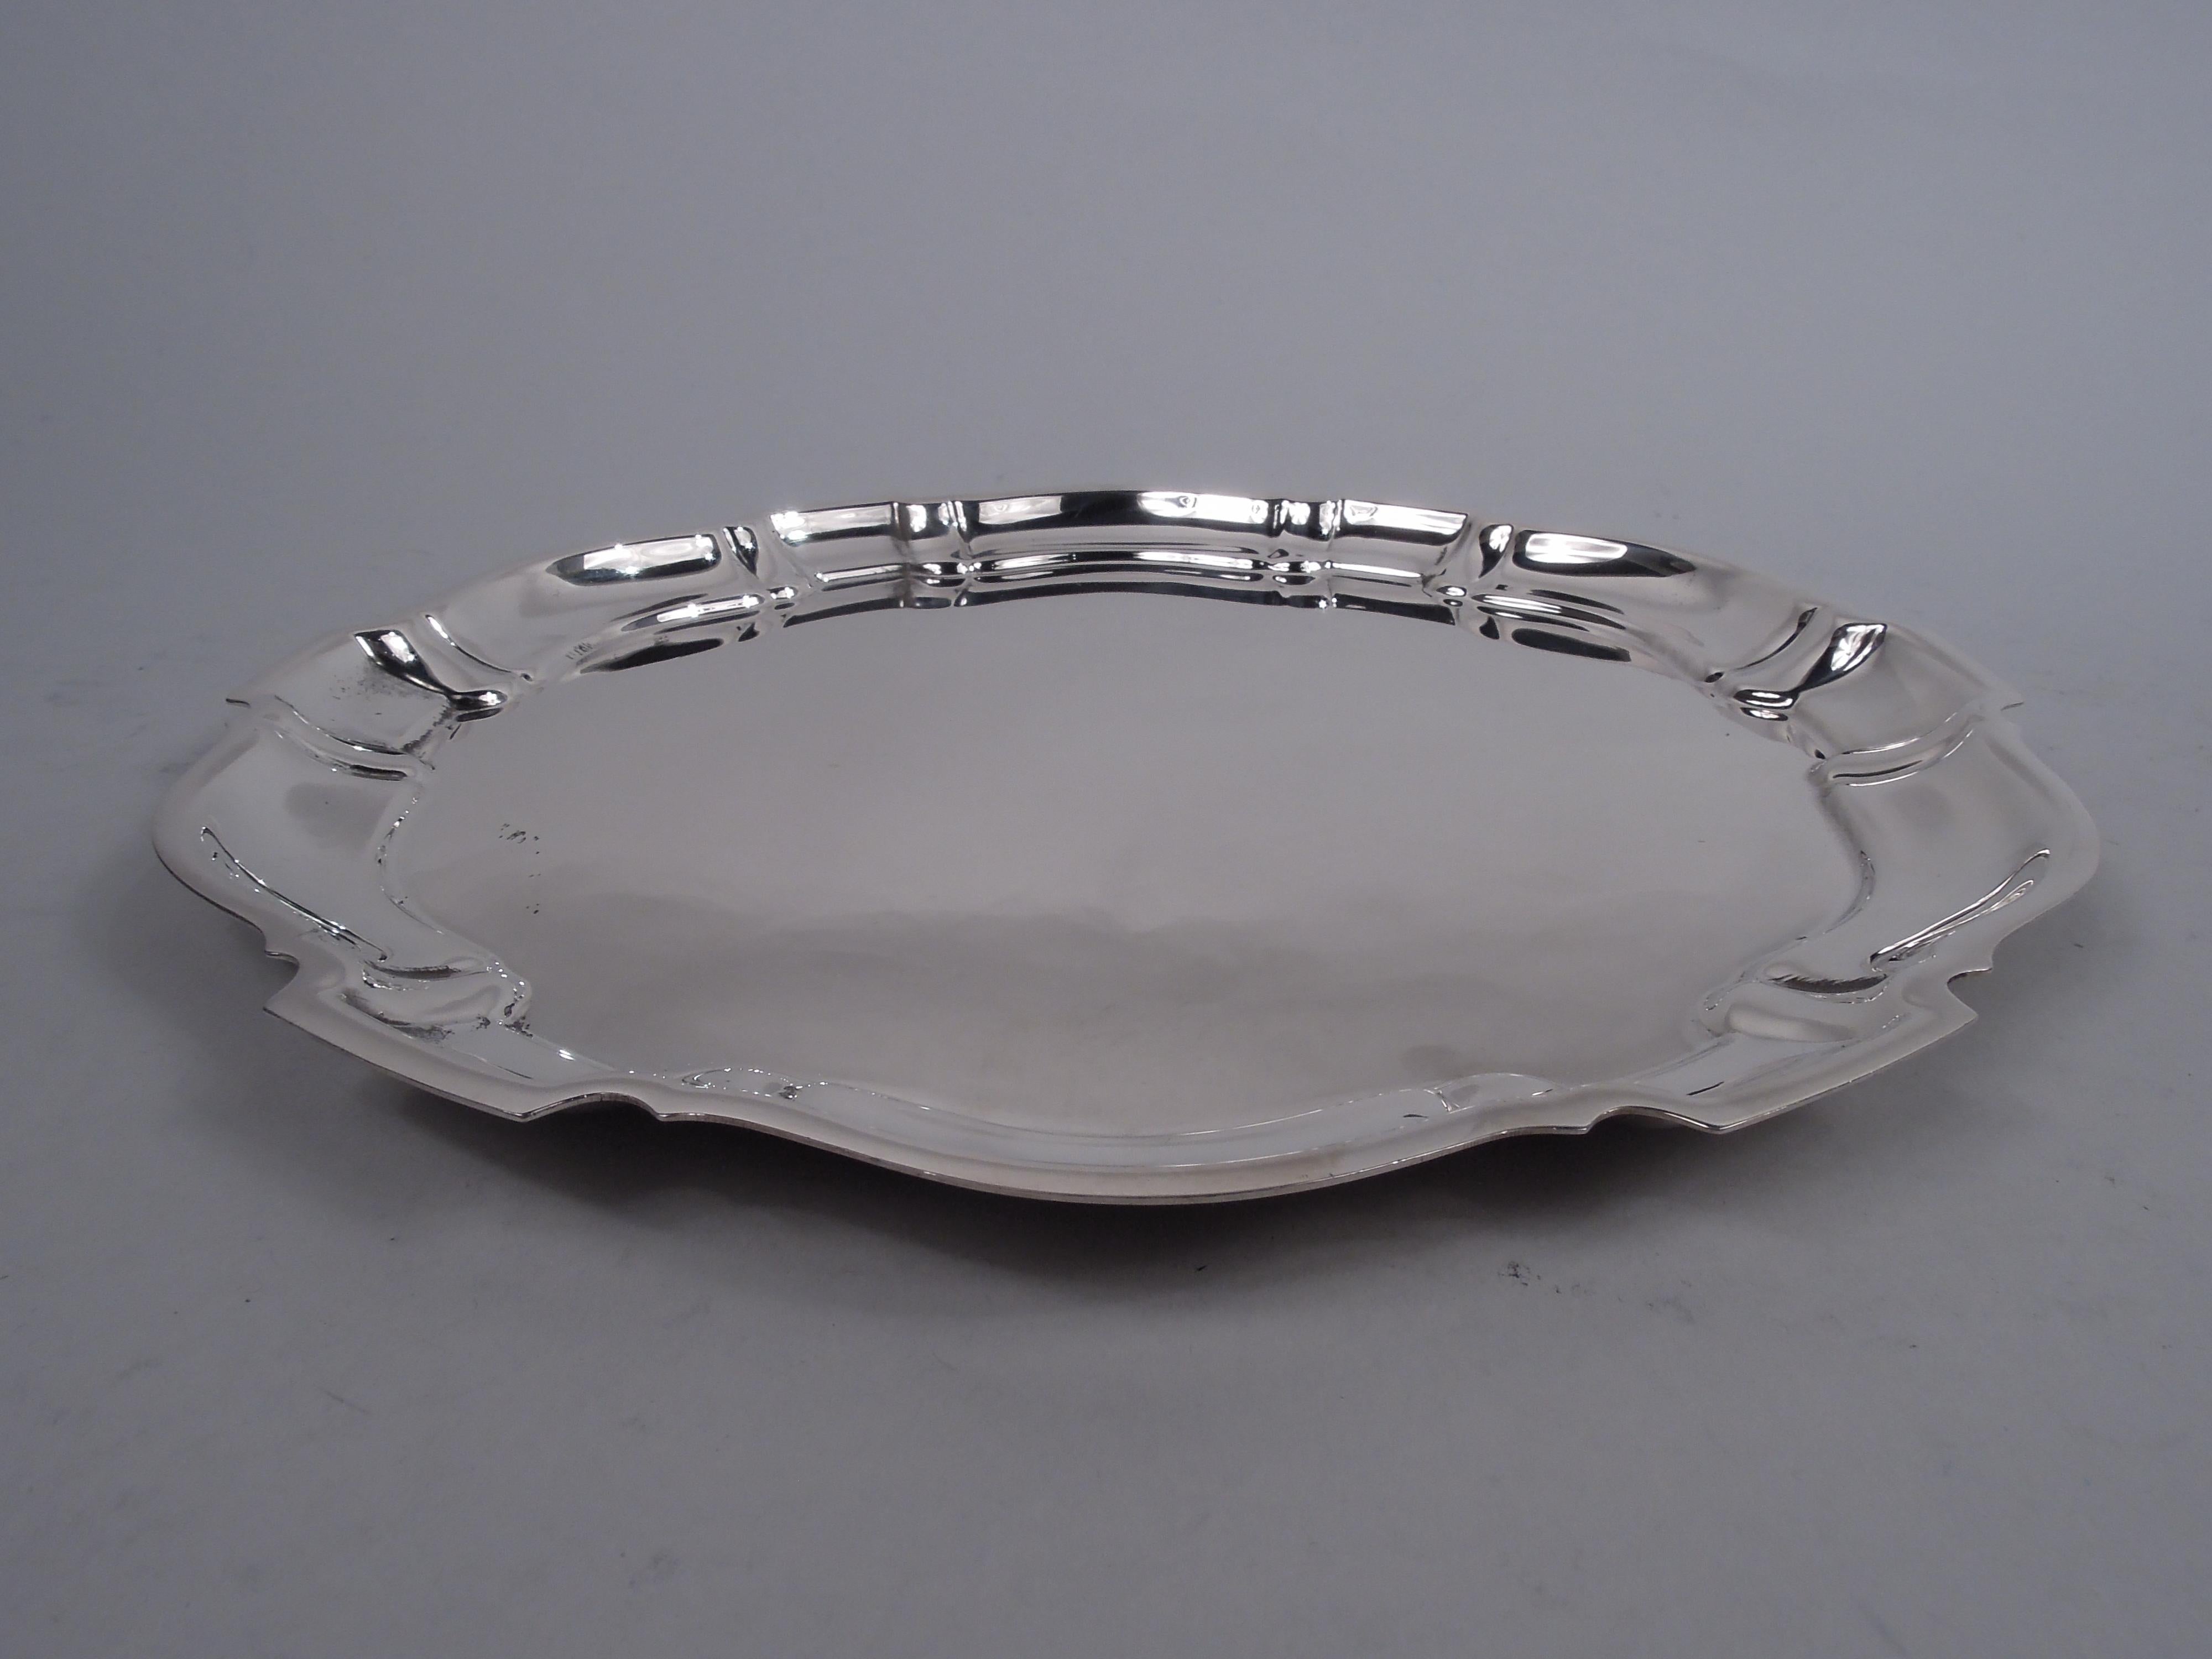 Chippendale sterling silver tray. Made by Poole in in Taunton, Mass. Round with flat and crisp Georgian-style curvilinear piecrust rim. Fully marked including maker’s stamp, pattern name, and no. 90. Weight: 15 troy ounces. 